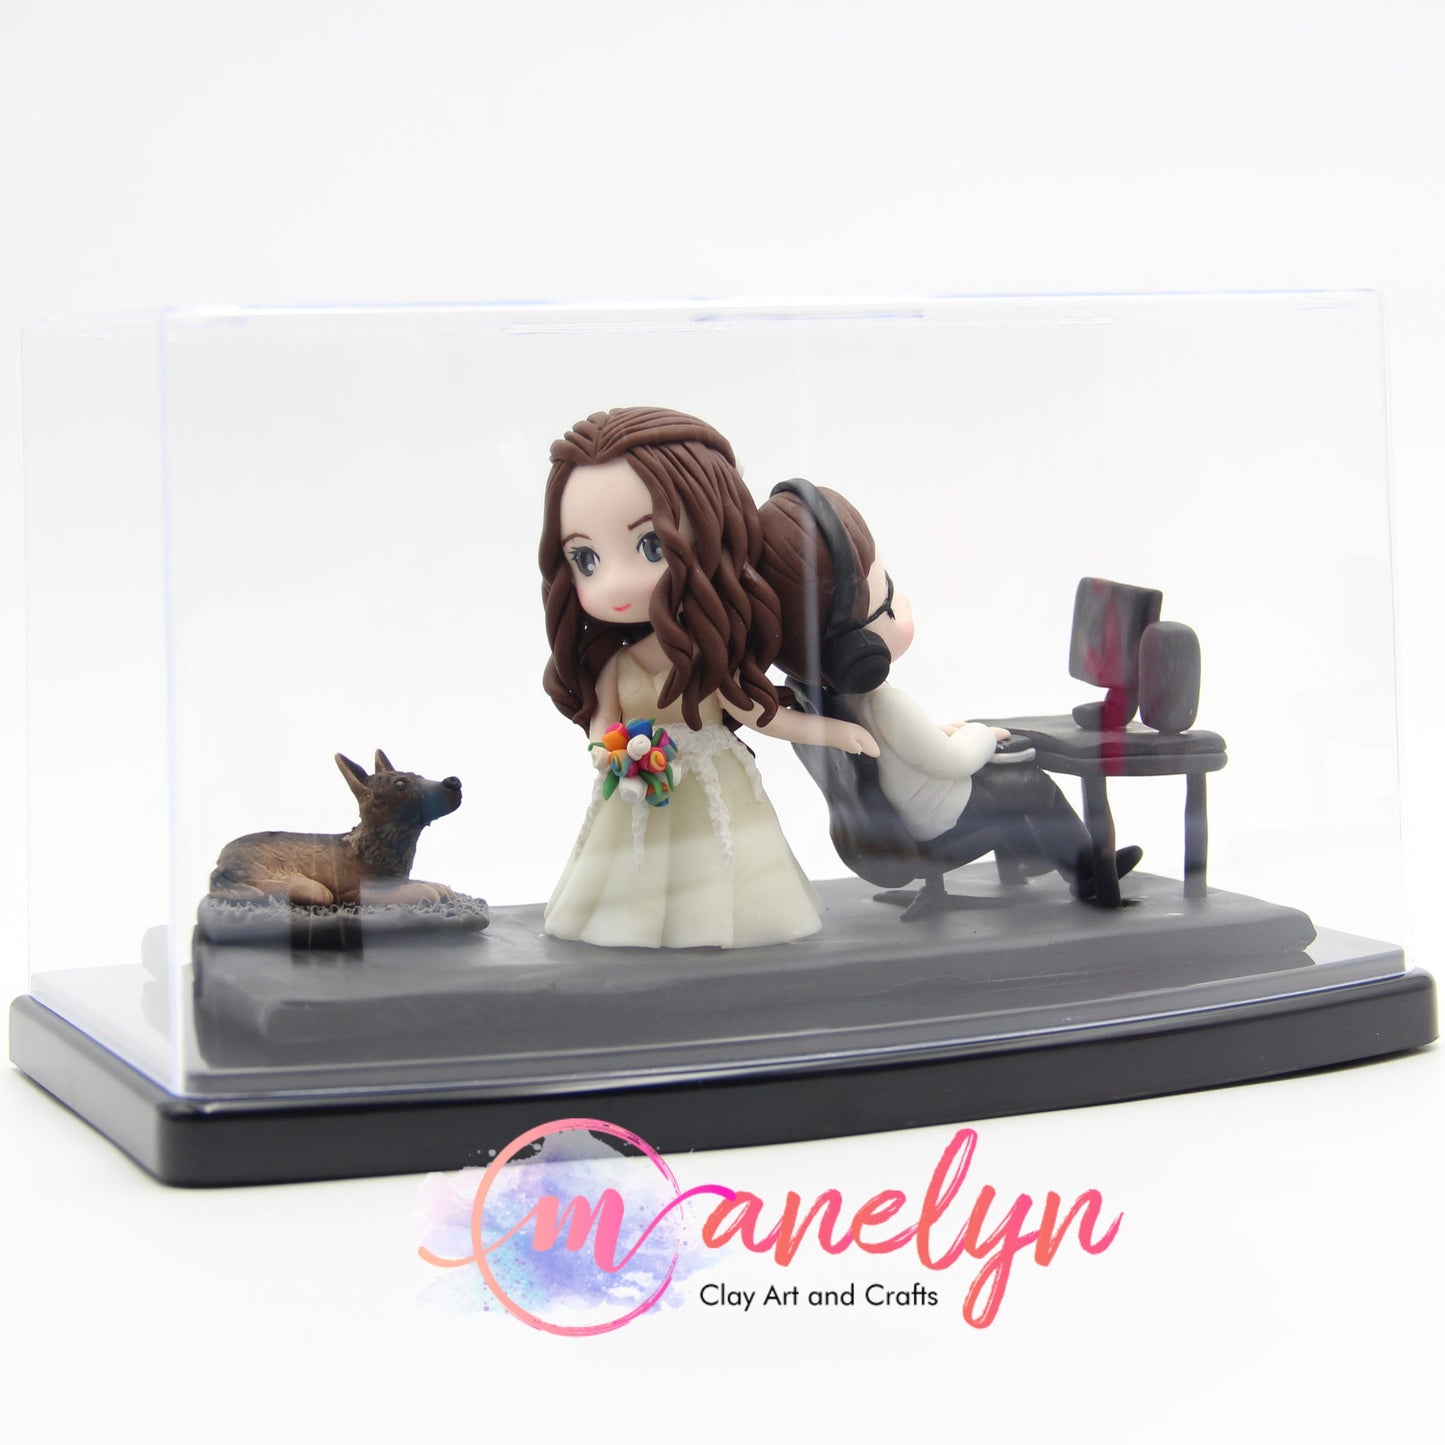 Video Game INSPIRED Funny Custom Made Wedding Cake Topper of Gamer Junkie Gaming Addict Bride and Groom Clay Figurines